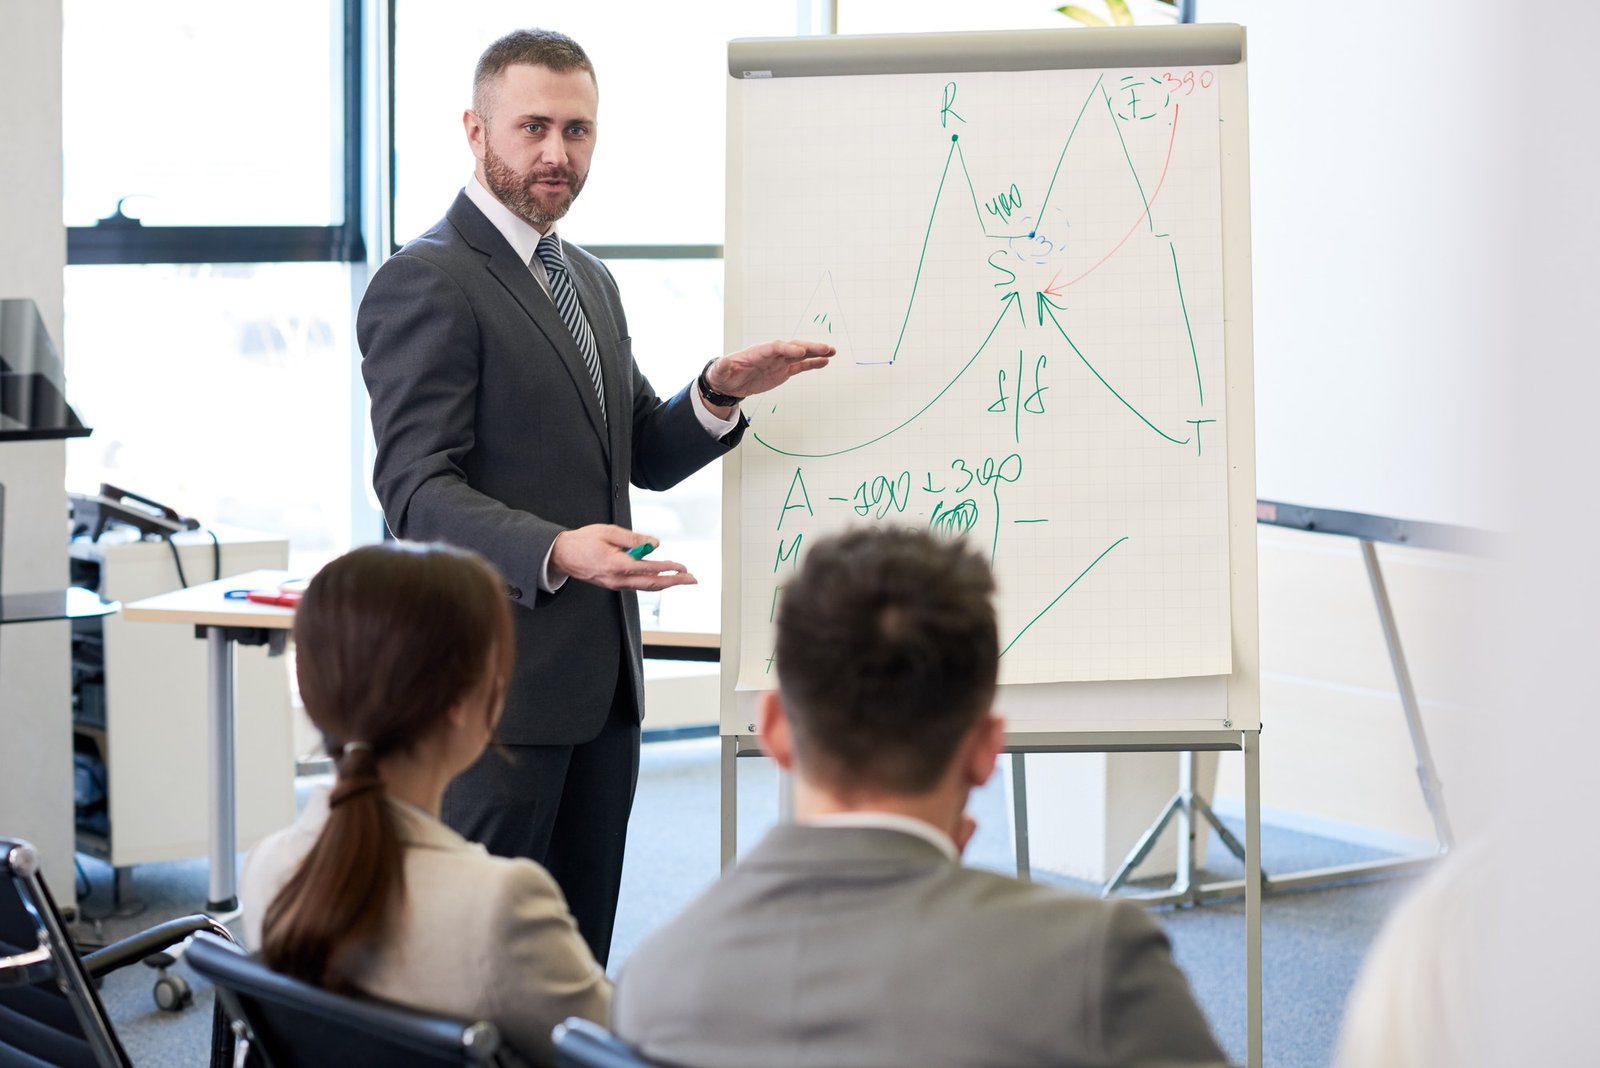 Mature Business Coach at Whiteboard